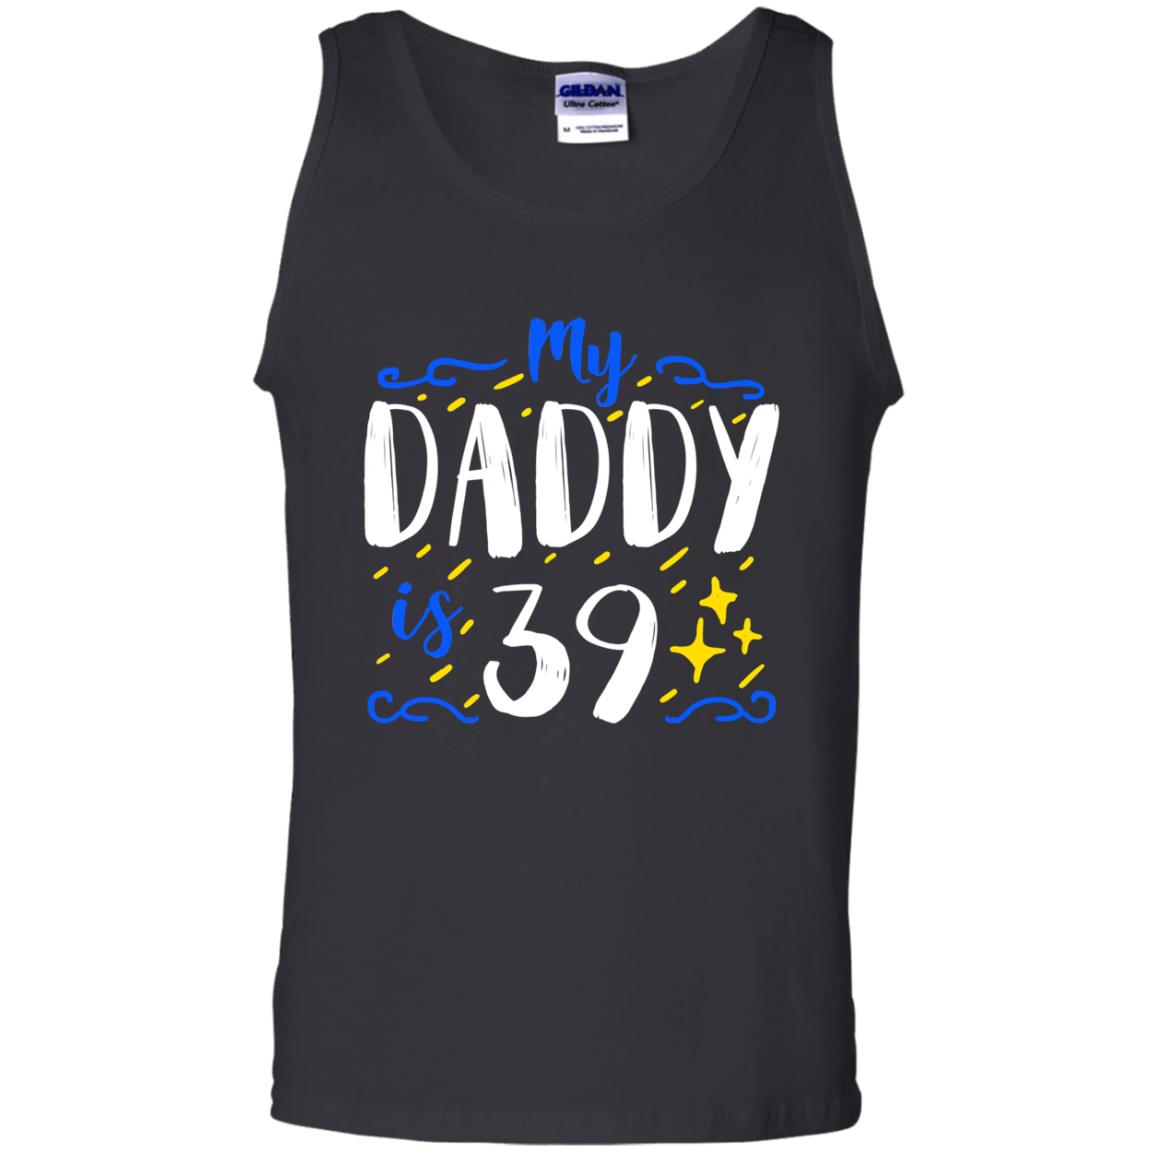 My Daddy Is 39 39th Birthday Daddy Shirt For Sons Or DaughtersG220 Gildan 100% Cotton Tank Top